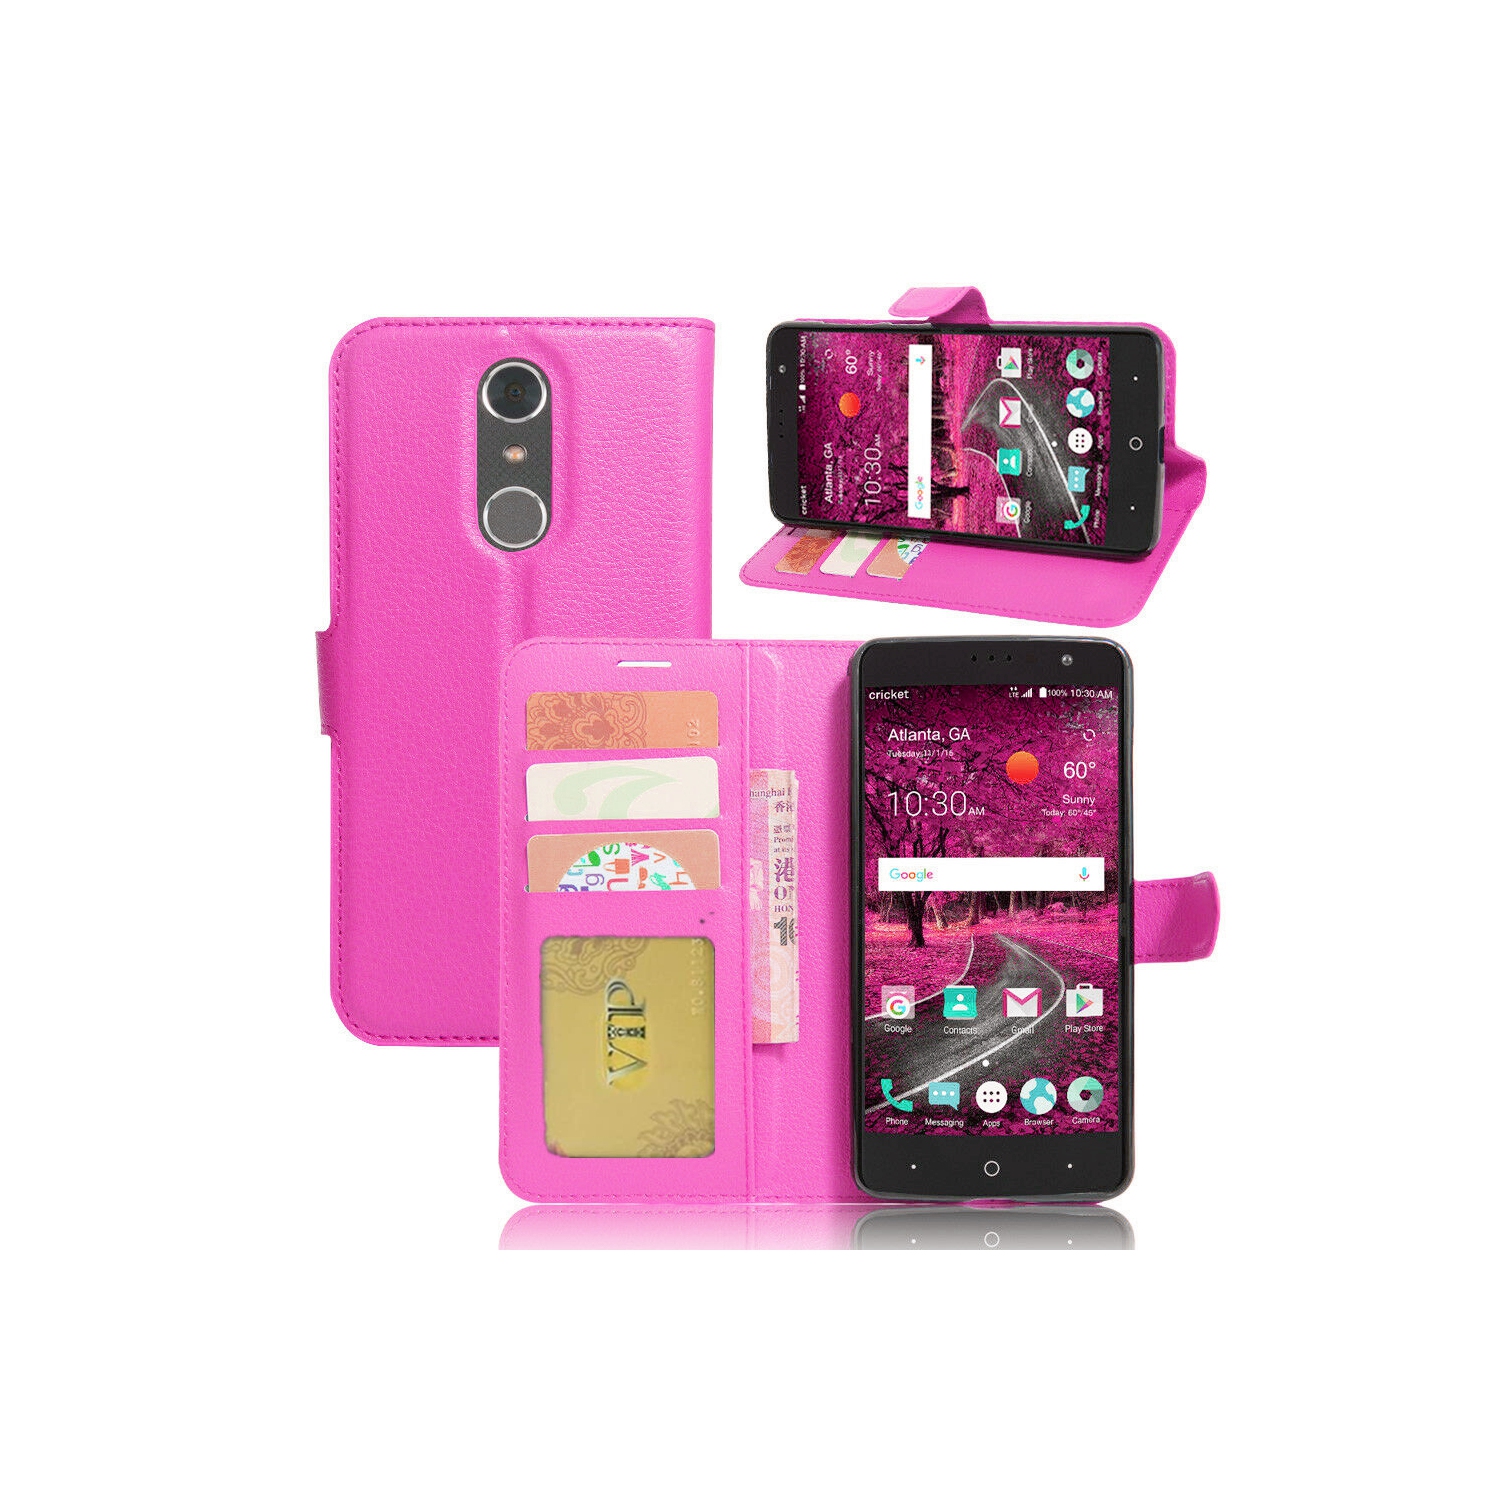 [CS] ZTE Grand X4 Case, Magnetic Leather Folio Wallet Flip Case Cover with Card Slot, Hot Pink